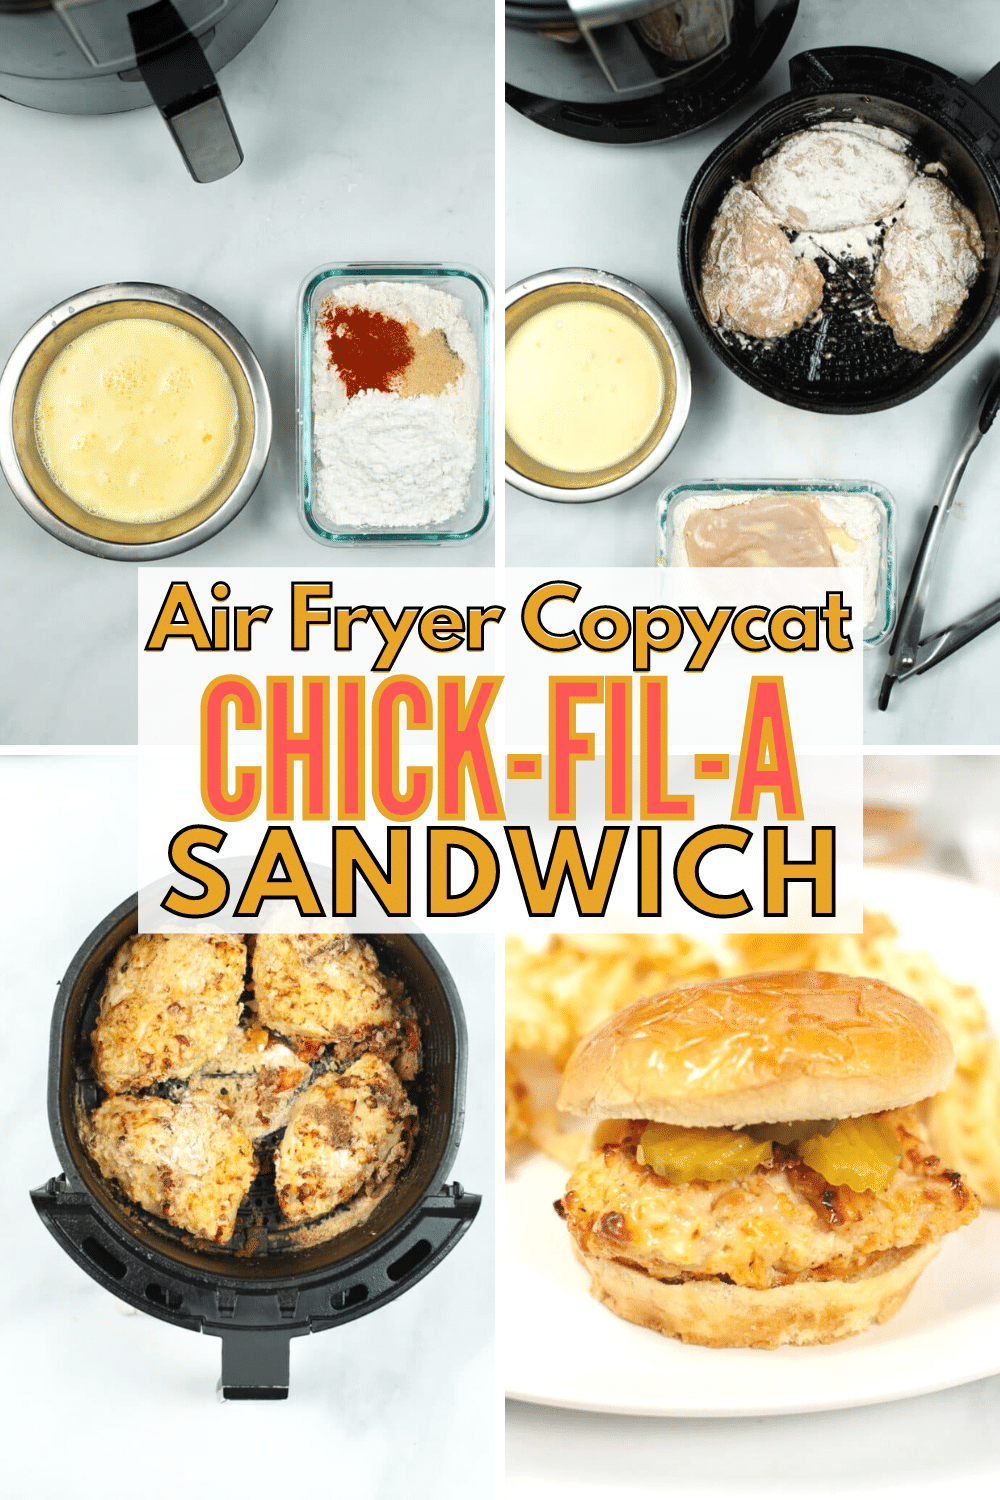 If you like Chick-fil-A Chicken Sandwiches, you're going to love this healthier homemade version made in your Air Fryer! #copycatrecipe #chickfila #chickensandwich via @wondermomwannab